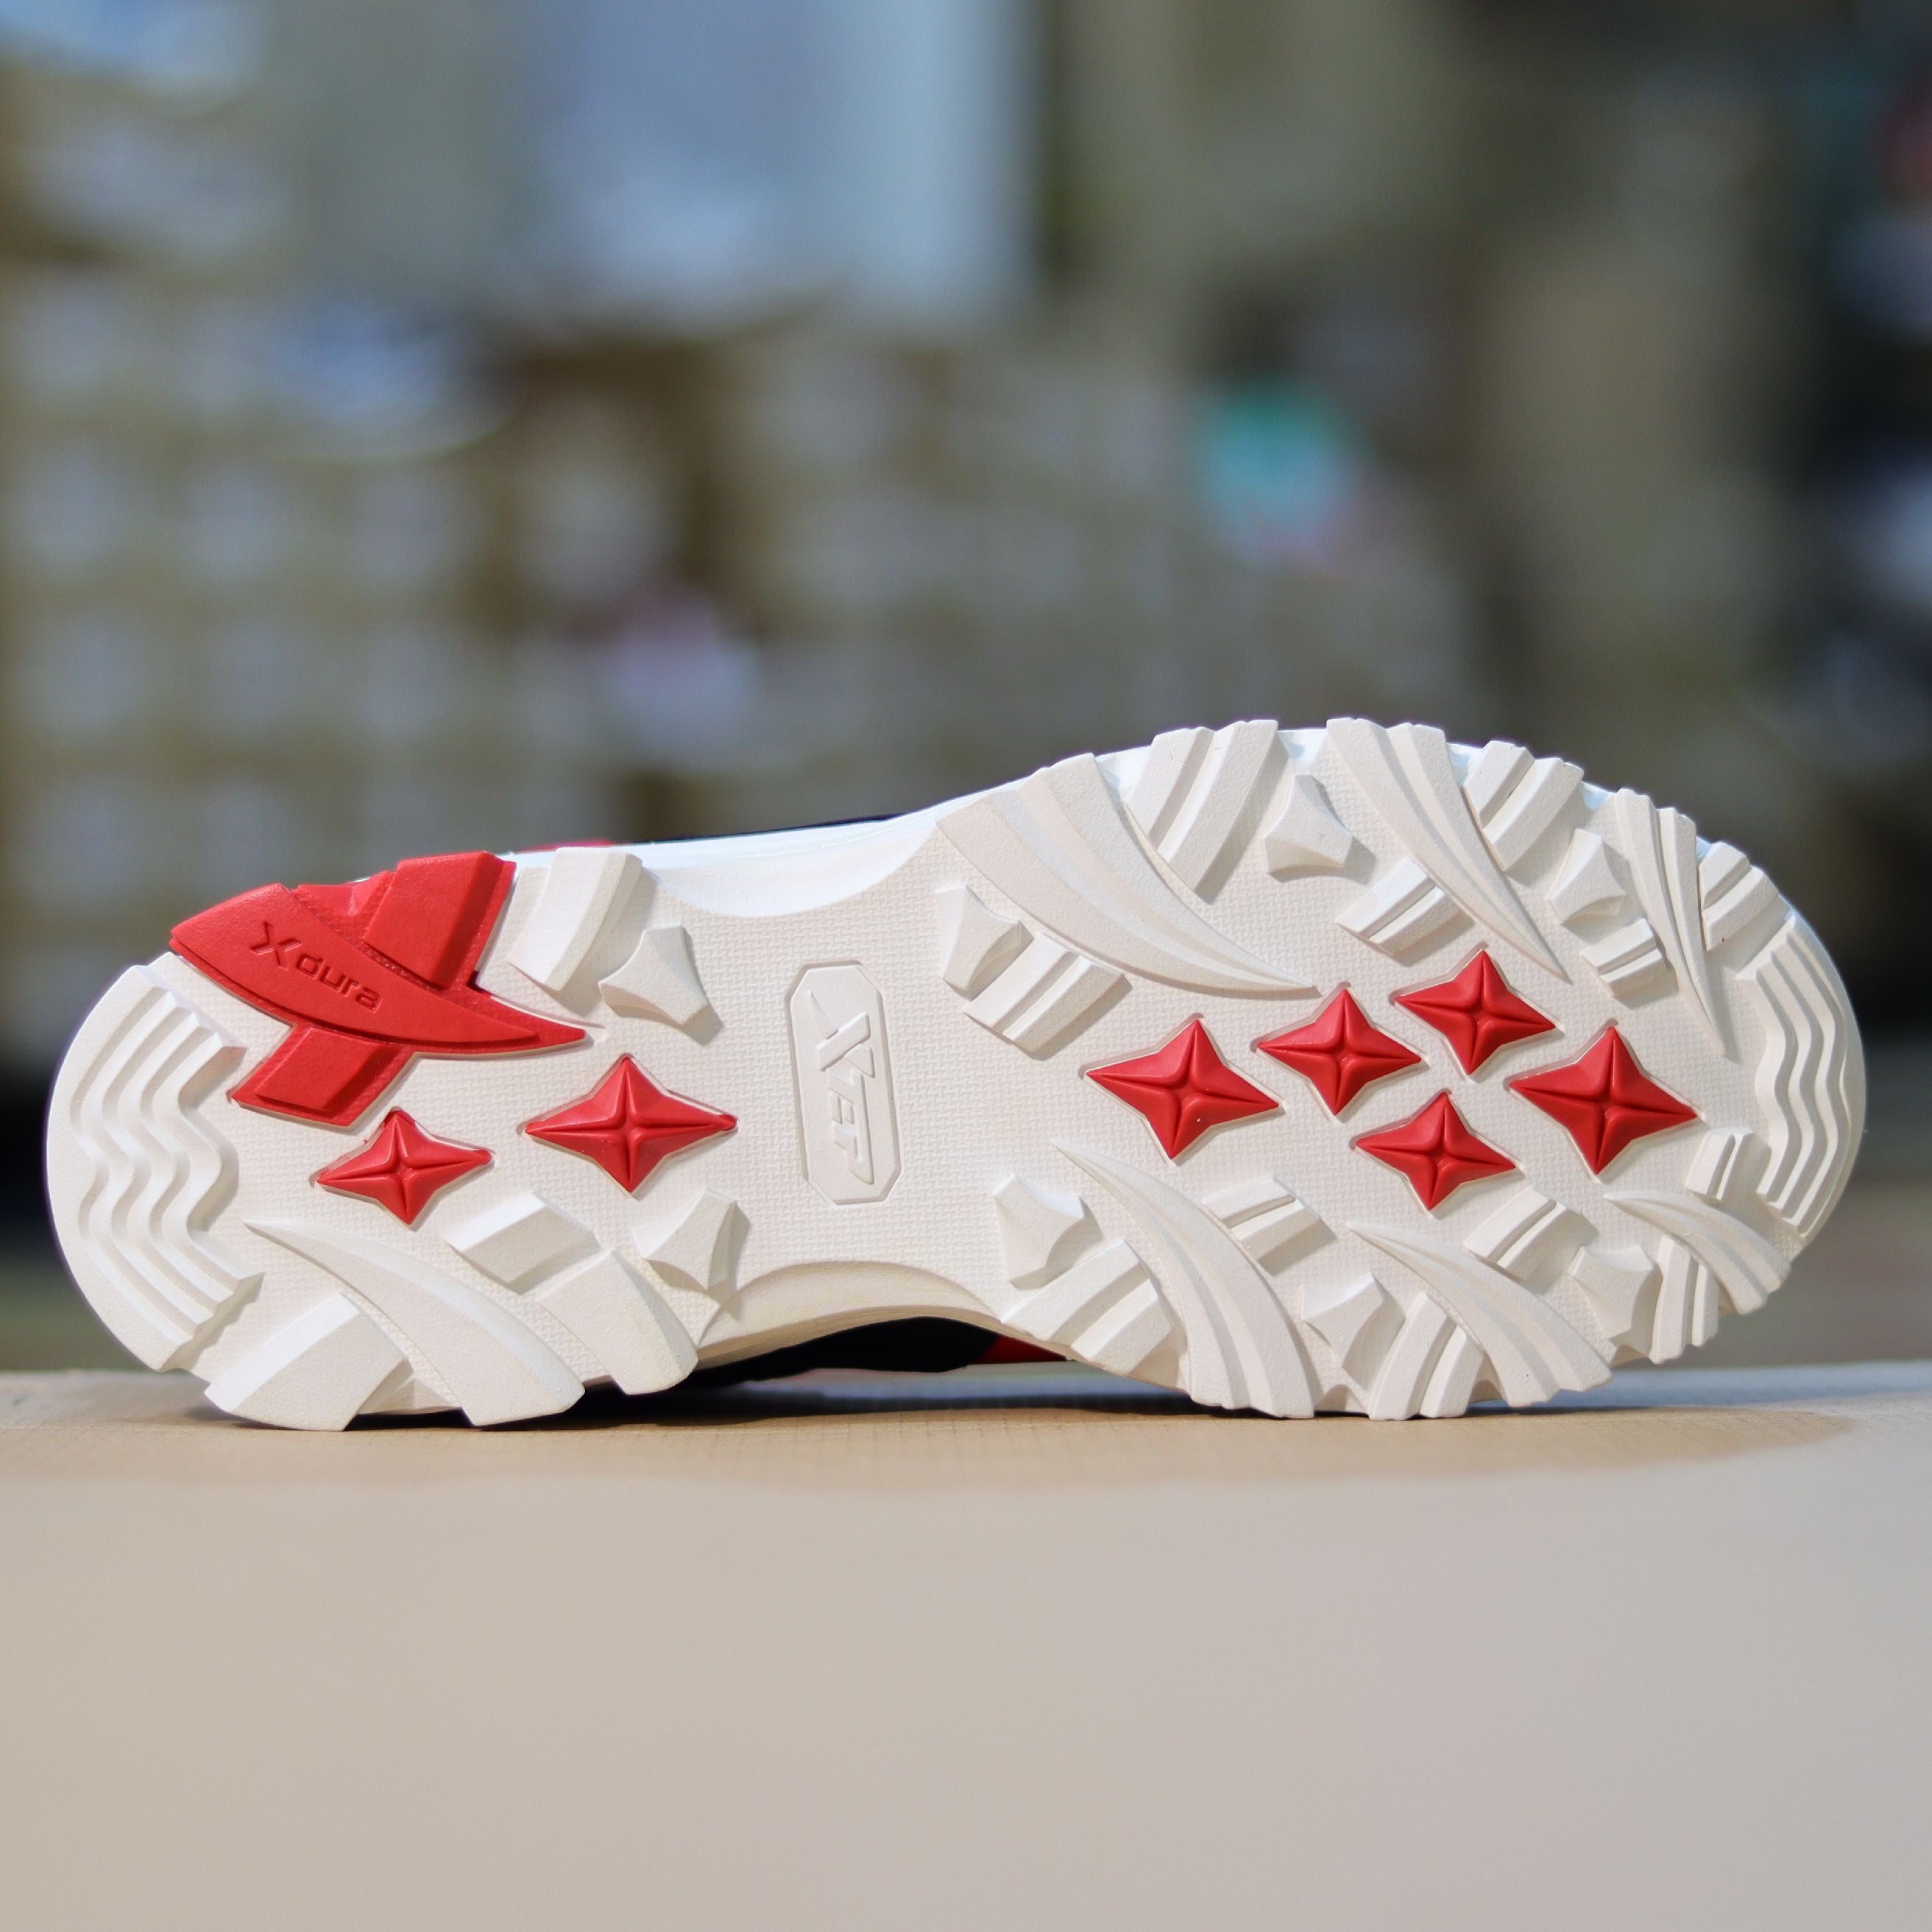 X12 - Outdoor Mountain Shoes by Xtep®